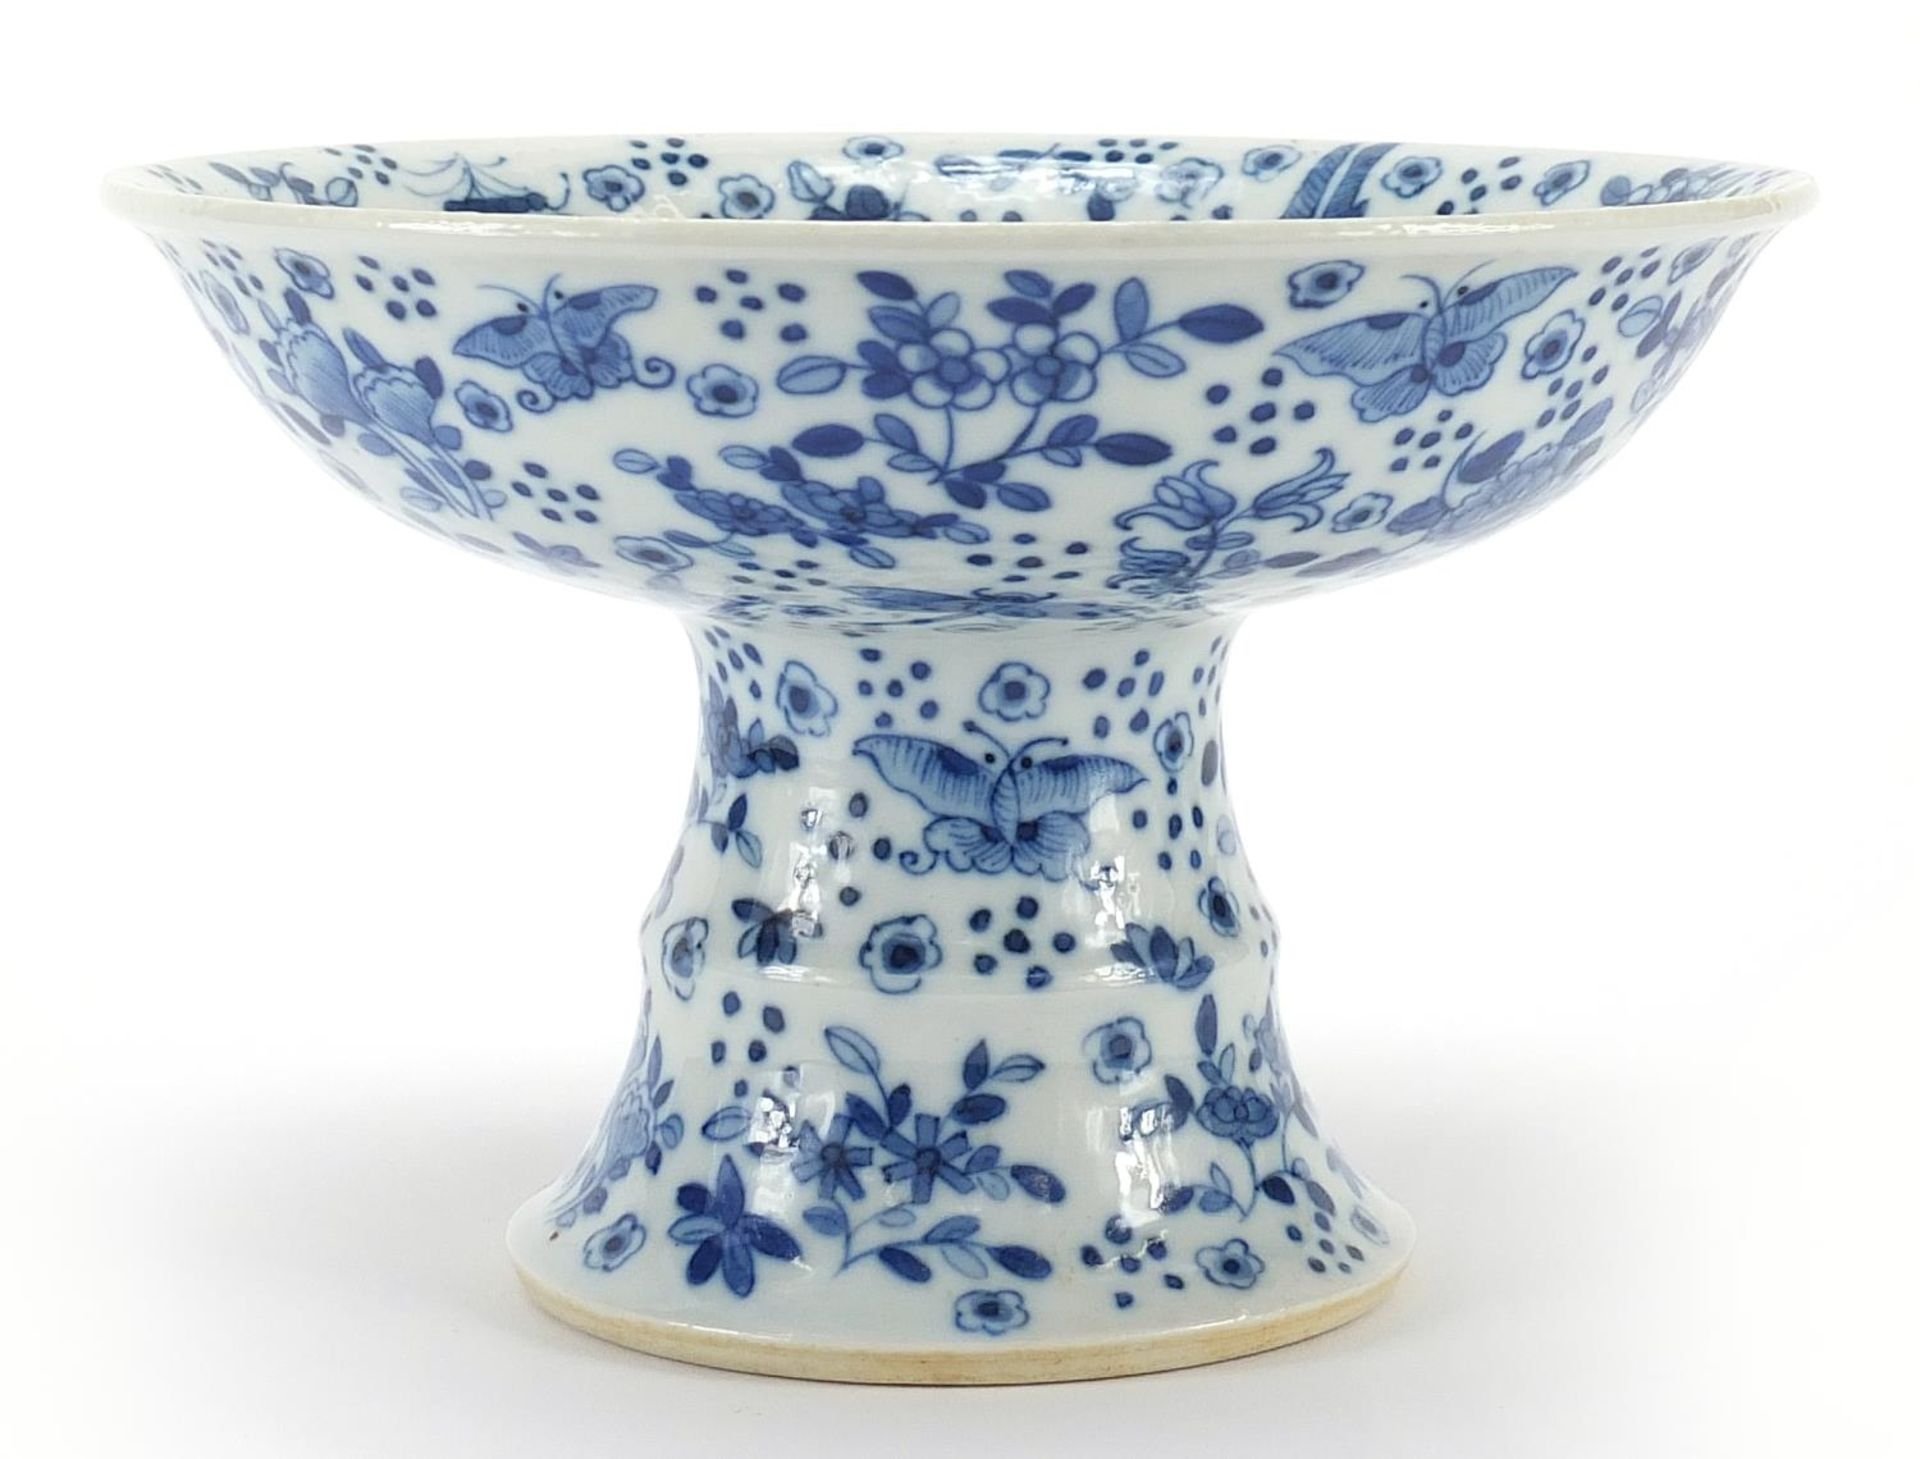 Chinese blue and white porcelain stem dish hand painted with flowers, 14cm high x 21cm in diameter - Image 2 of 4